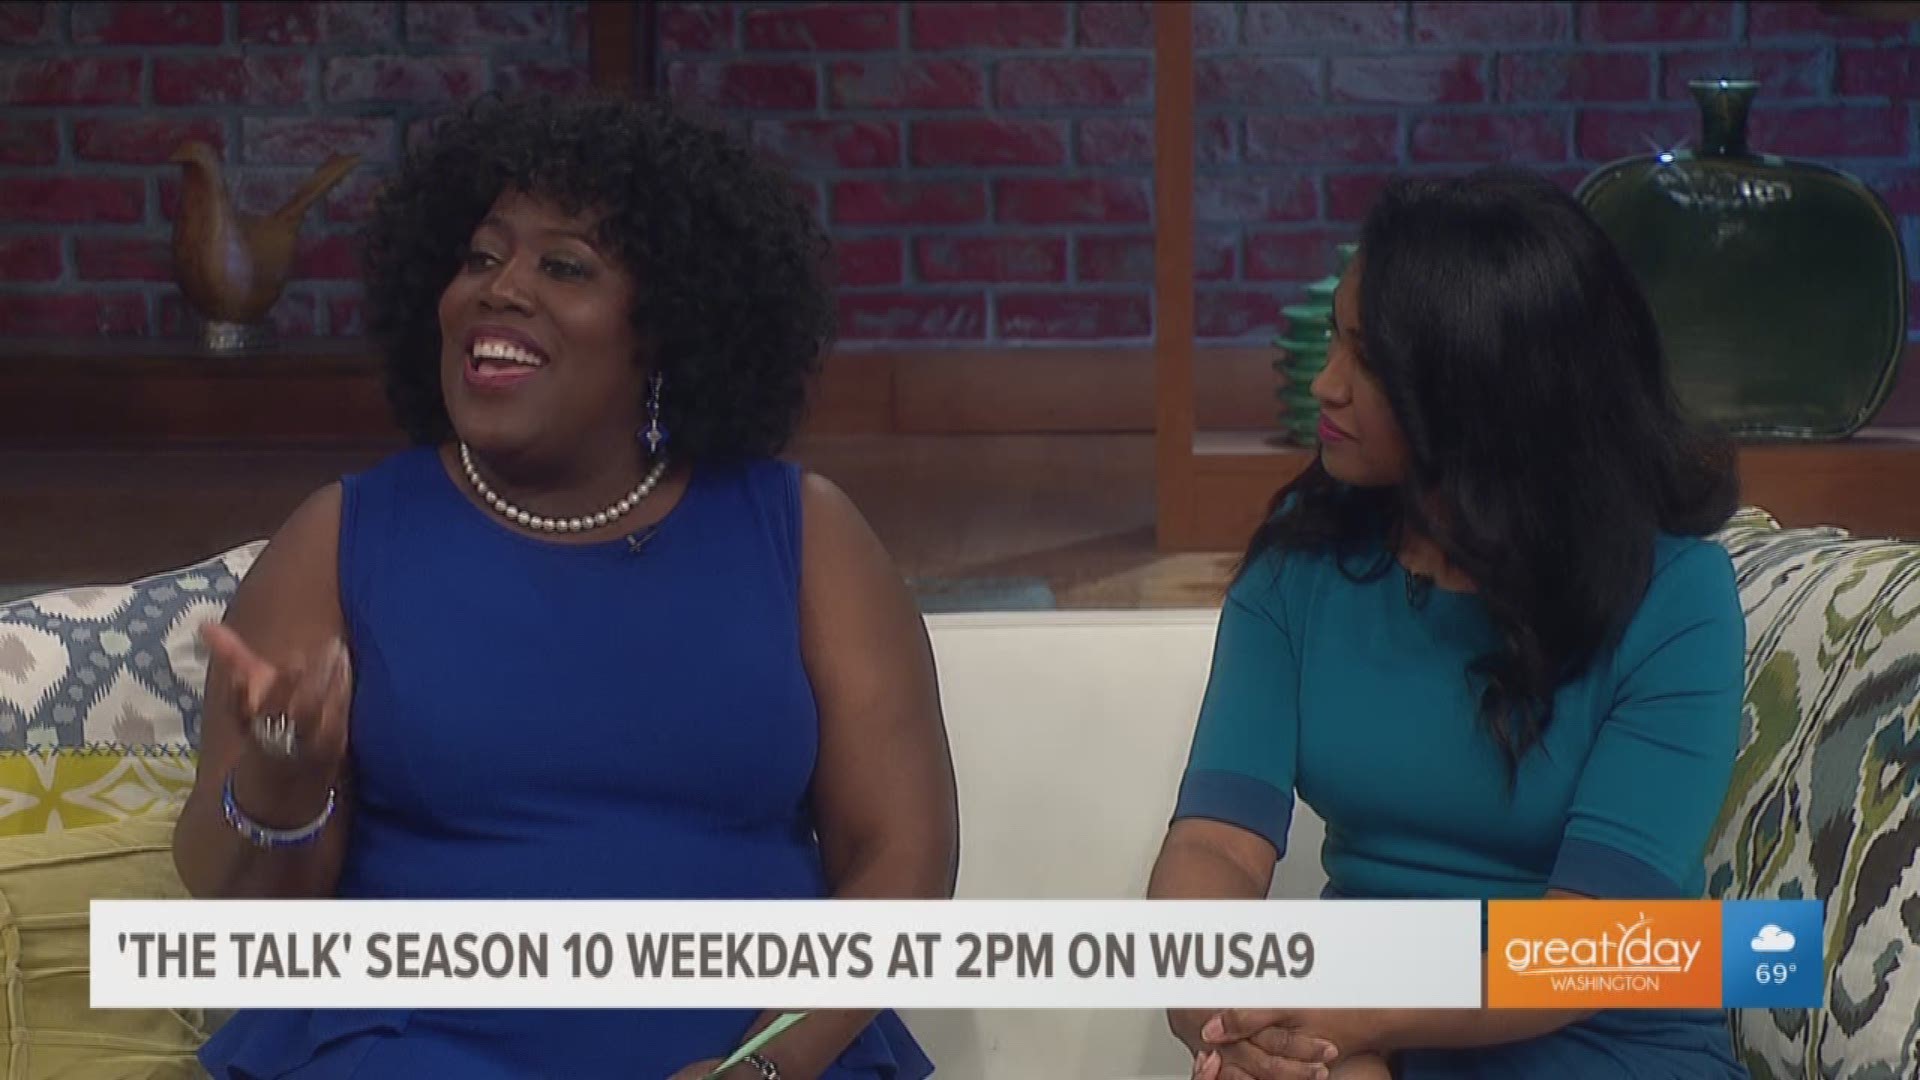 For our Morning Mix series, we give you a rundown on the latest news. This morning, Sheryl Underwood, host of the round table talk show The Talk joins the ladies to talk about her latest projects, Meghan Markle's return and more.